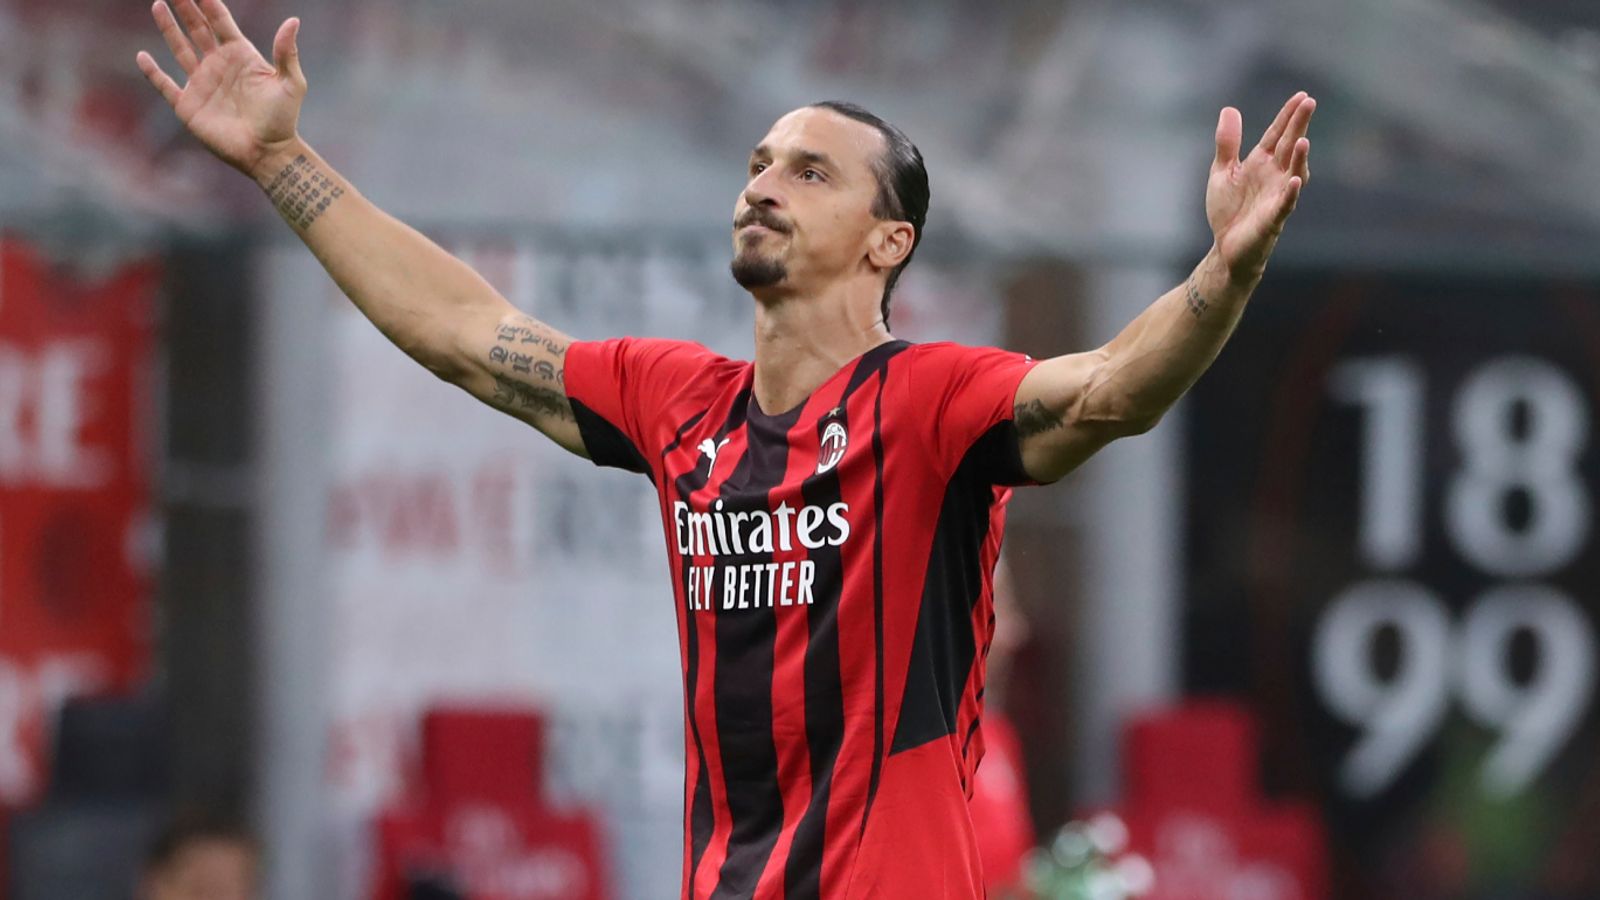 Zlatan Ibrahimovic: AC striker says he is a 'little scared to stop playing' football and wants to at club 'for life' | Football News | Sports